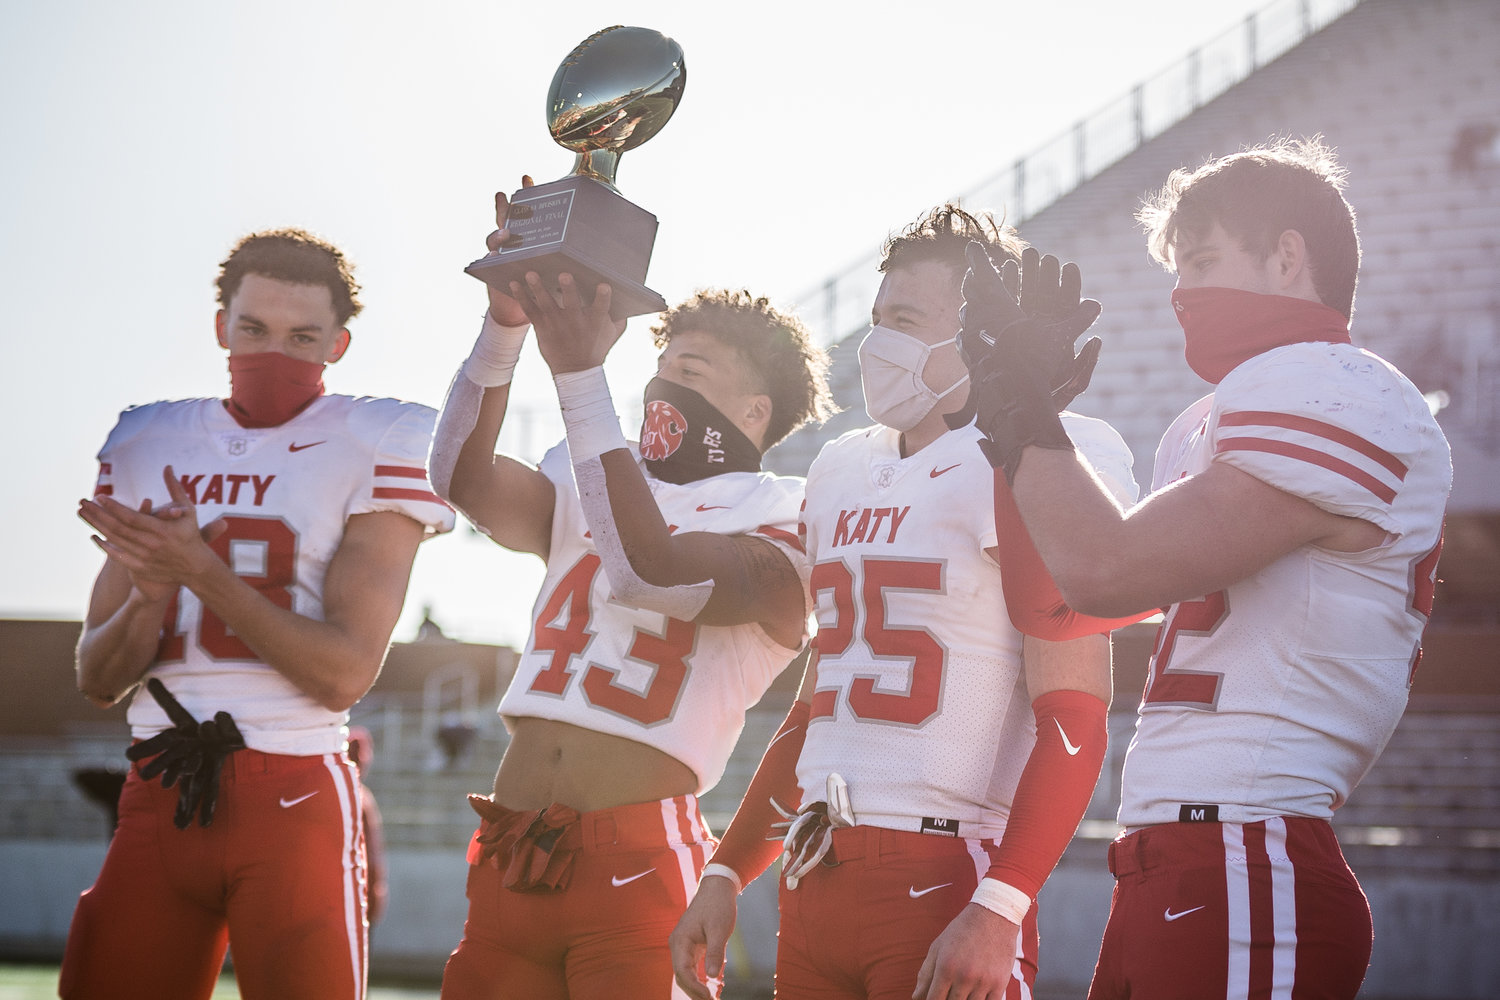 Katy High's team captains, from left to right senior Taylor Saulsberry, senior Dalton Johnson, senior Shepherd Bowling and junior Ty Kana, hold up the regional final trophy following the Tigers' 49-24 win over Shadow Creek on Dec. 26 at Freedom Field.